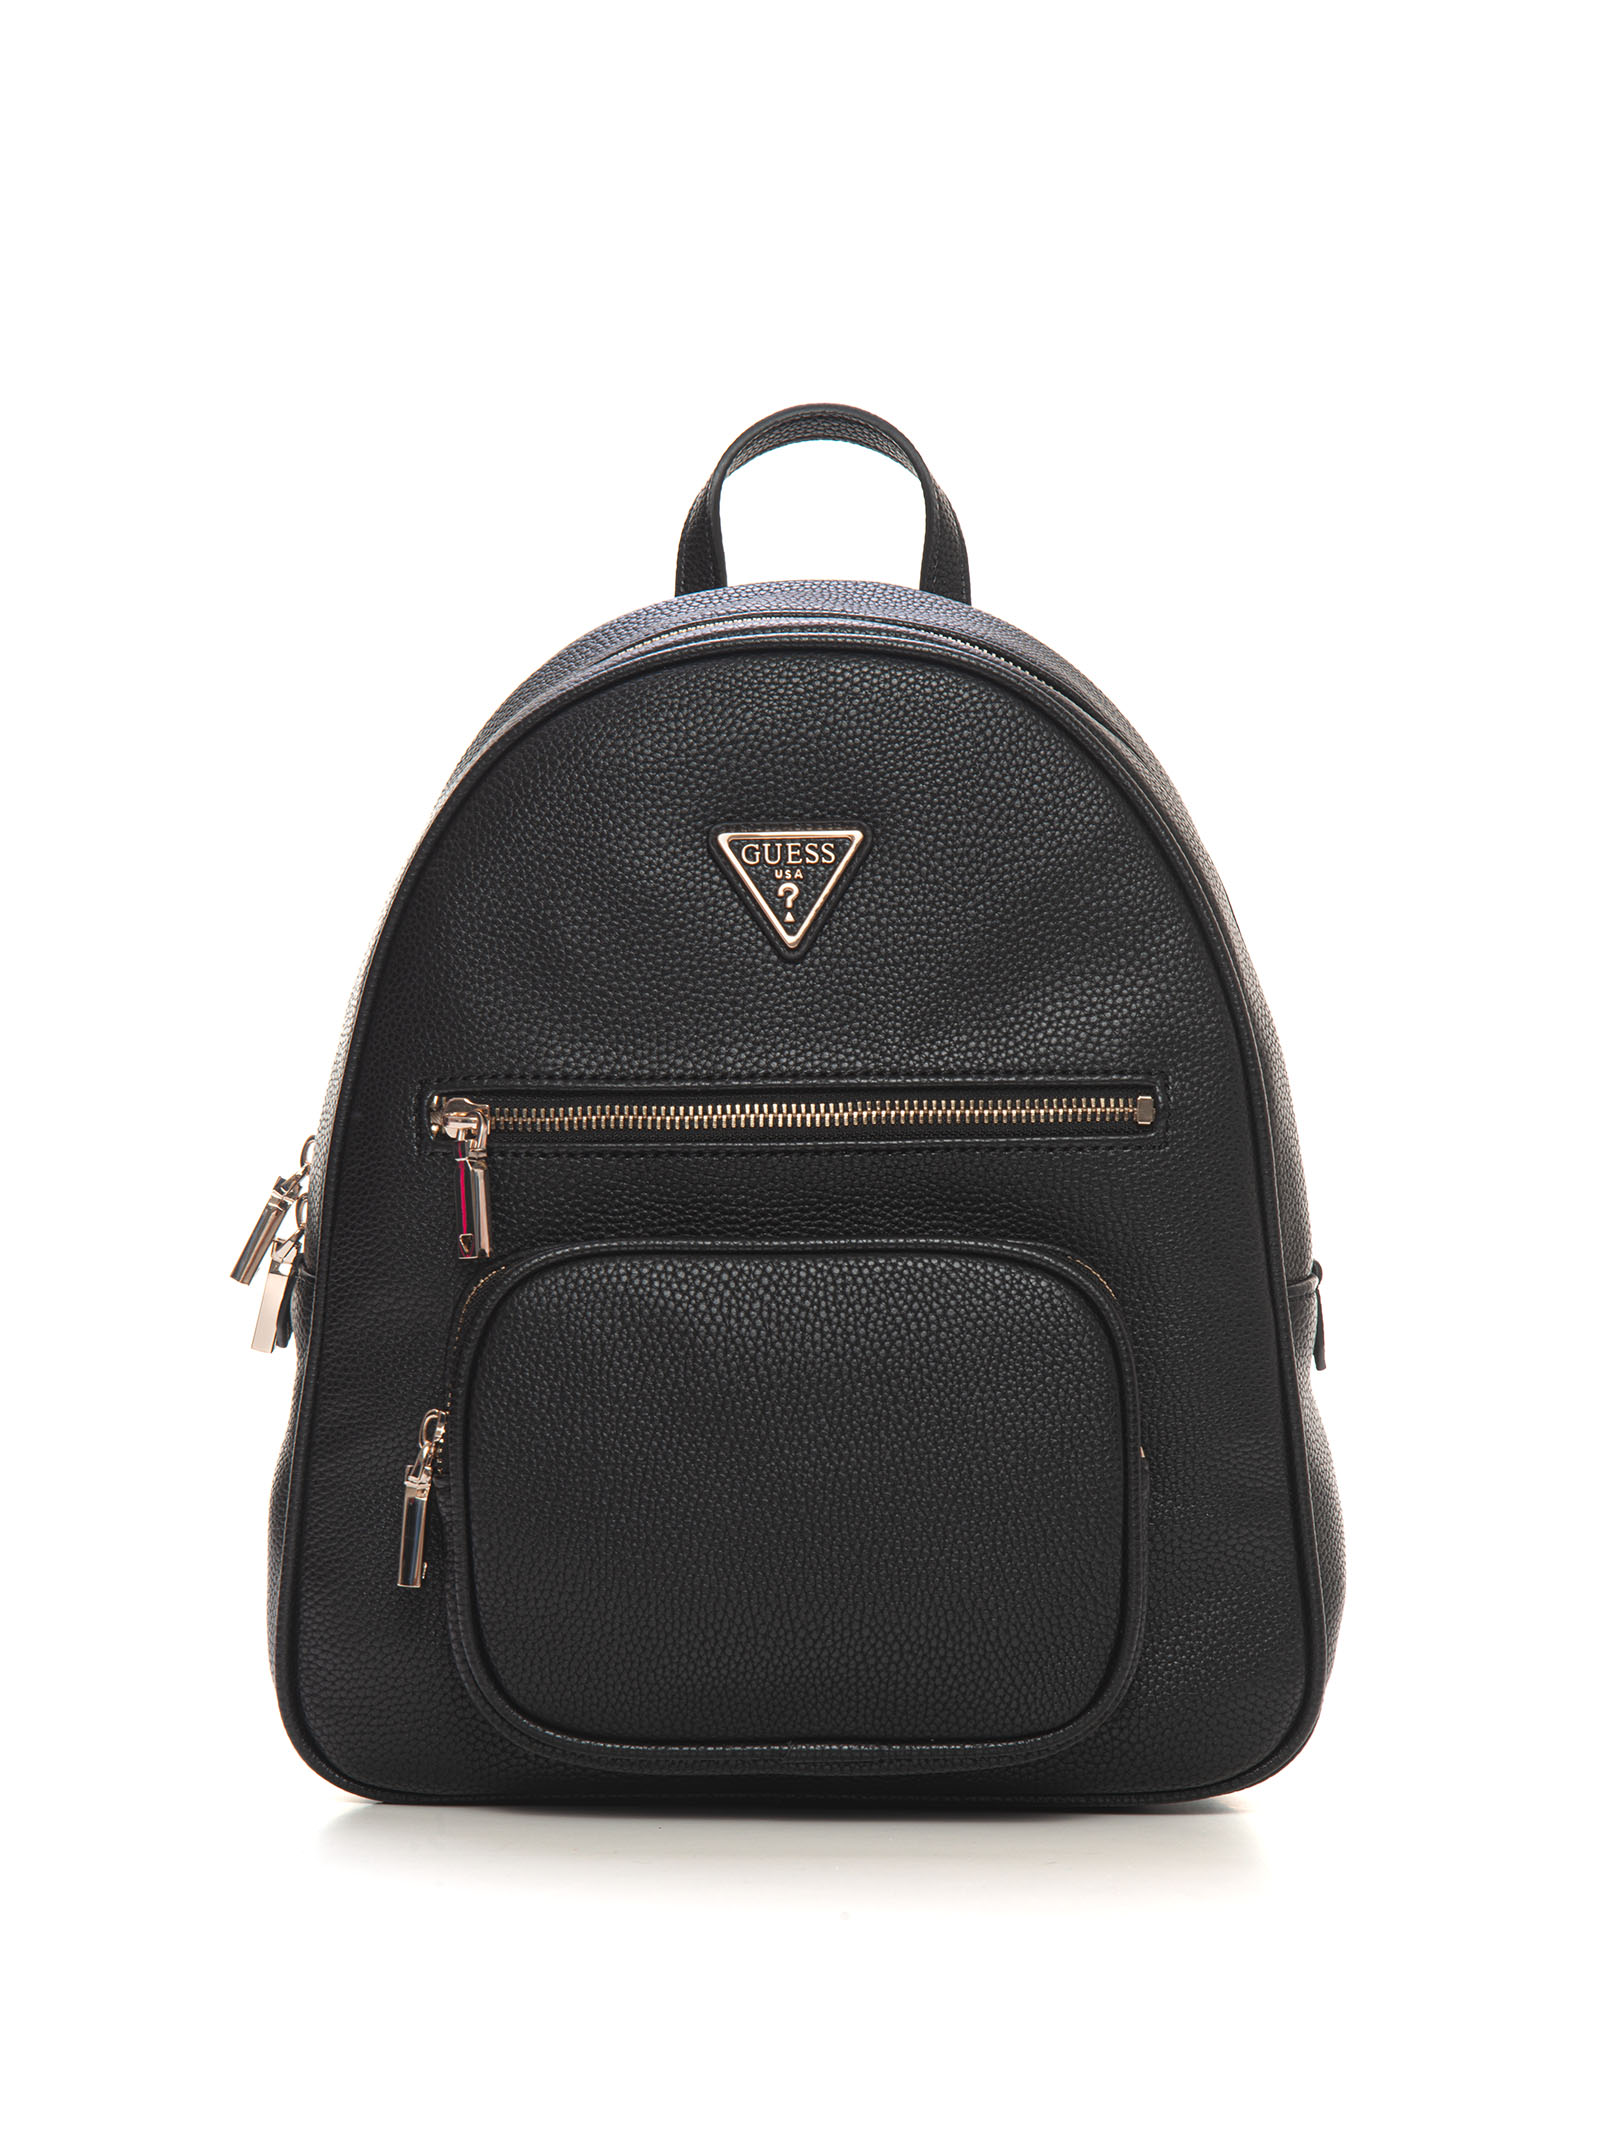 Guess Eco Elements Rucksack In Black